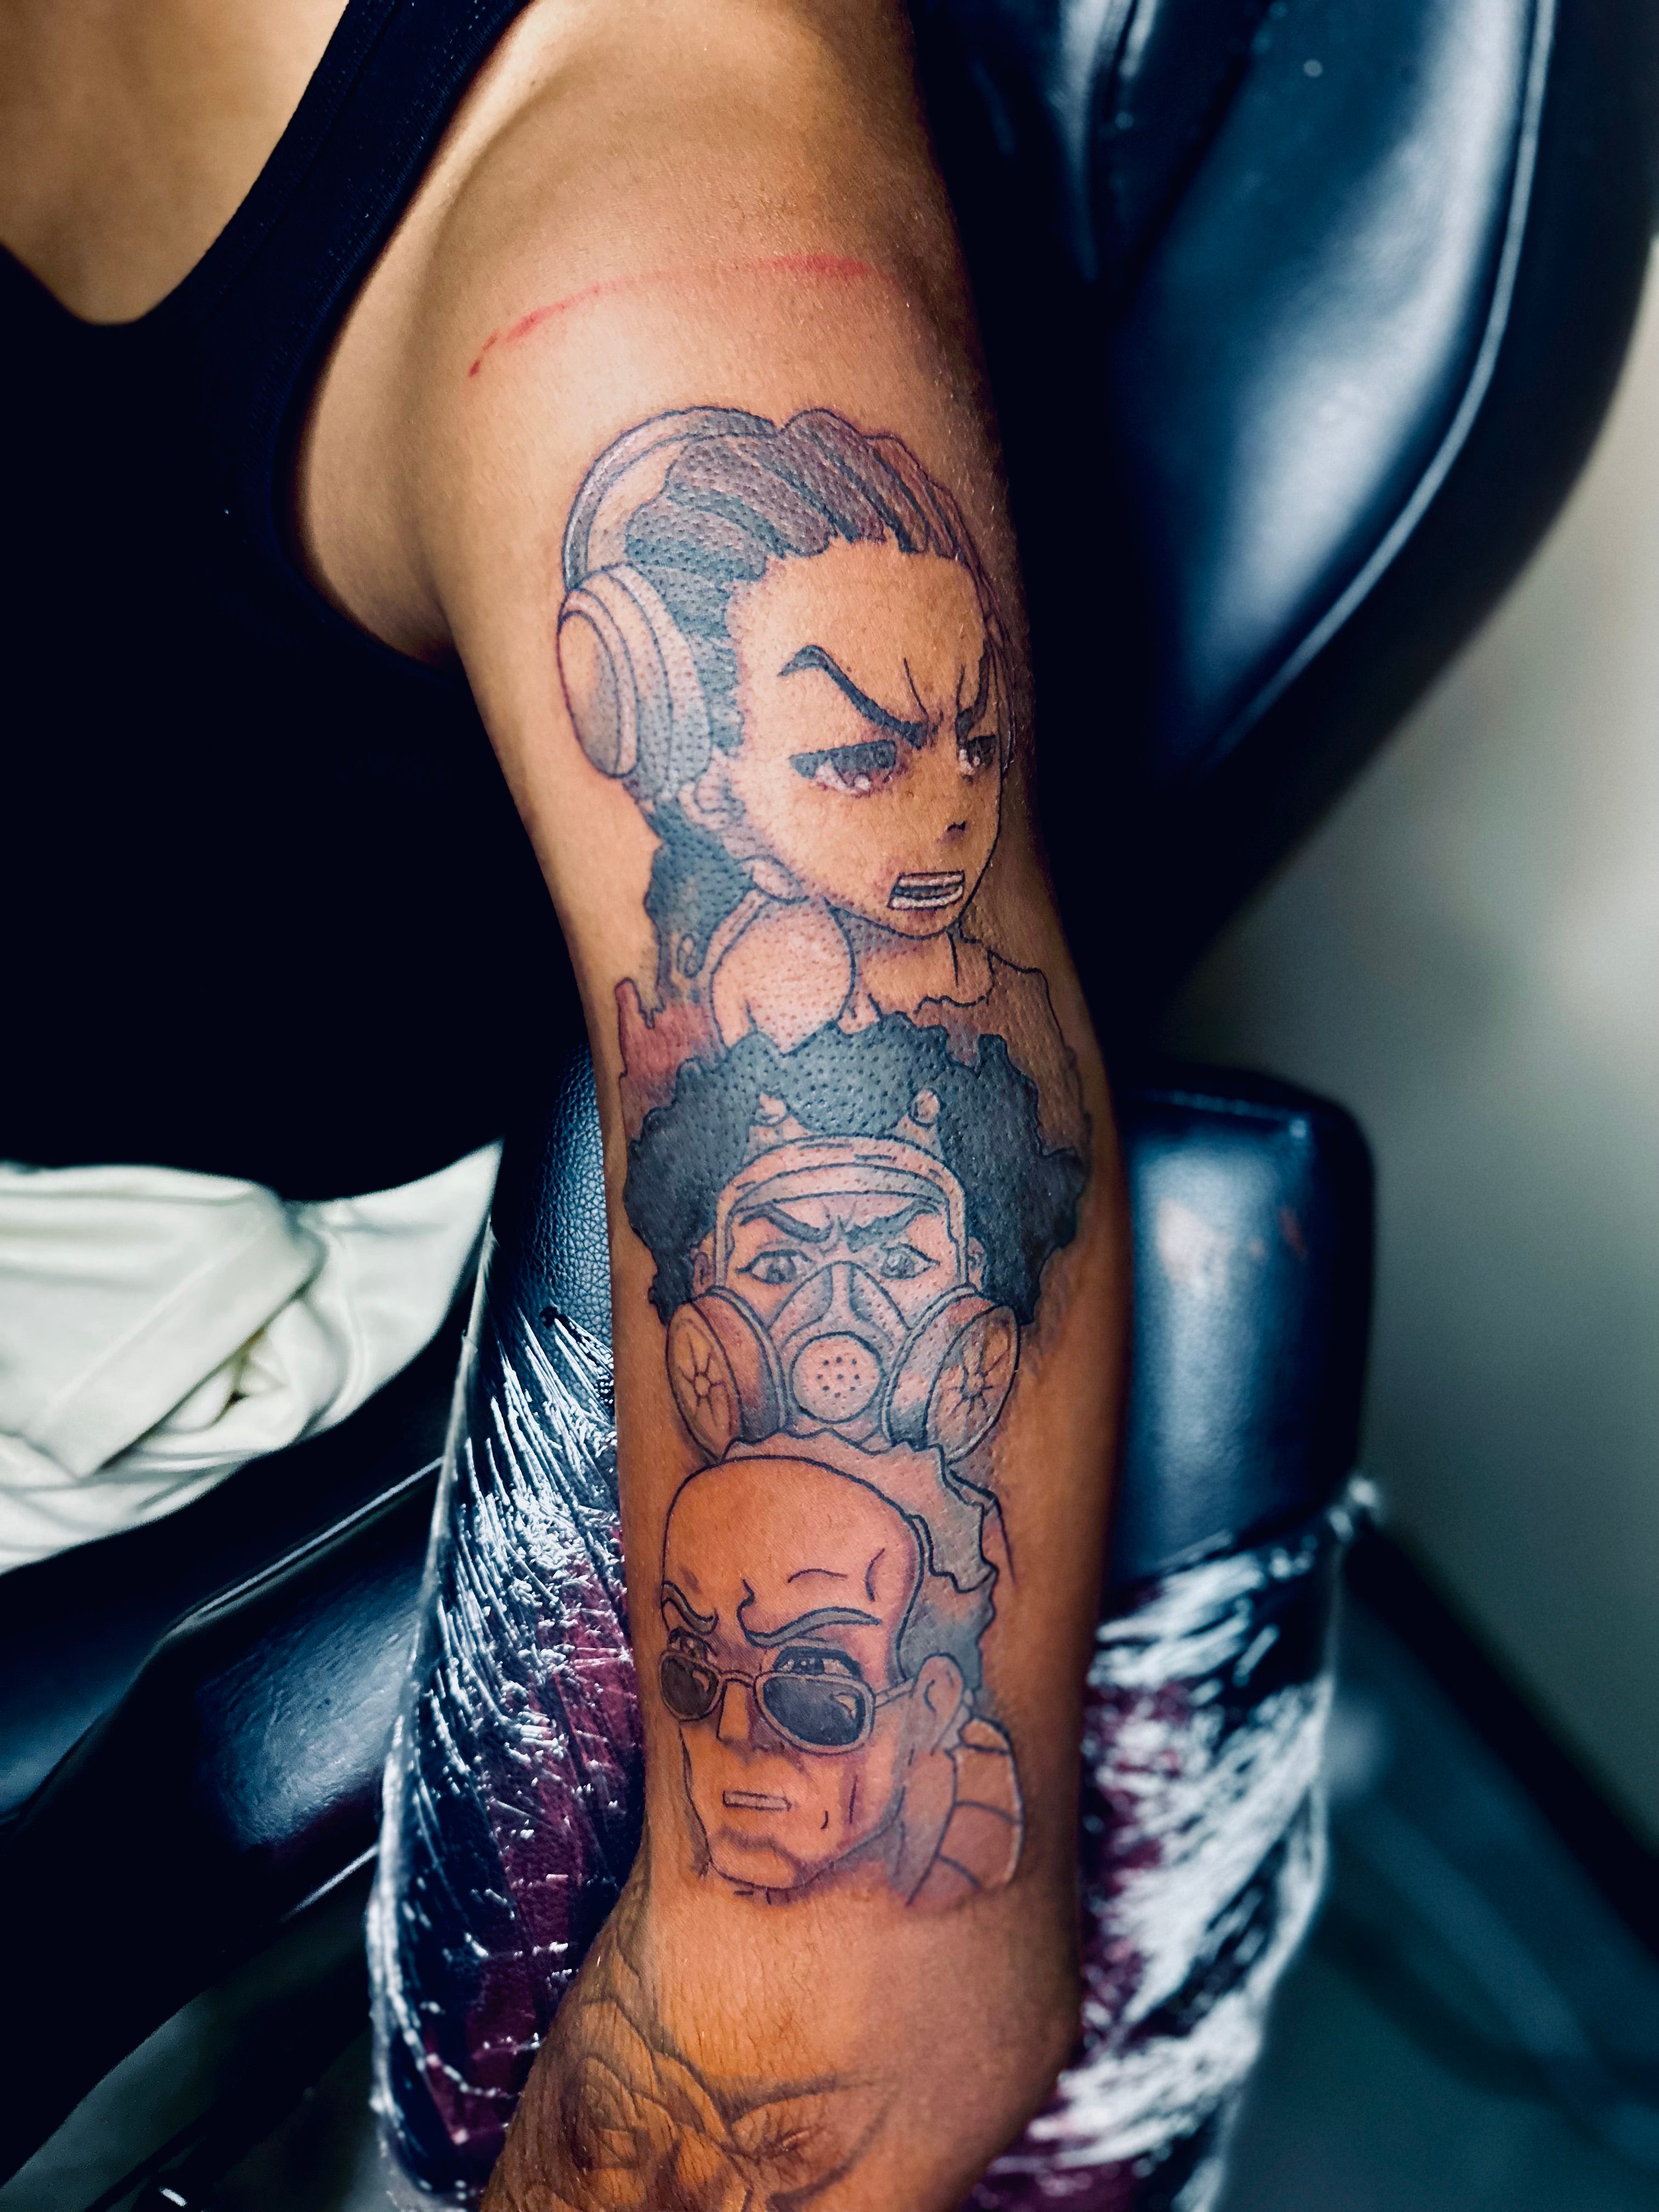 Art Collective Tattoos  Piercing  Huey for my Boondocks fans only  available artcollectiveaugusta 3010 WASHINGTON RD  ArtCollectiveAugcom BOOK NOW  tattoos mentattoos explorerpage  augustanational csra womentattoos dailyphoto 